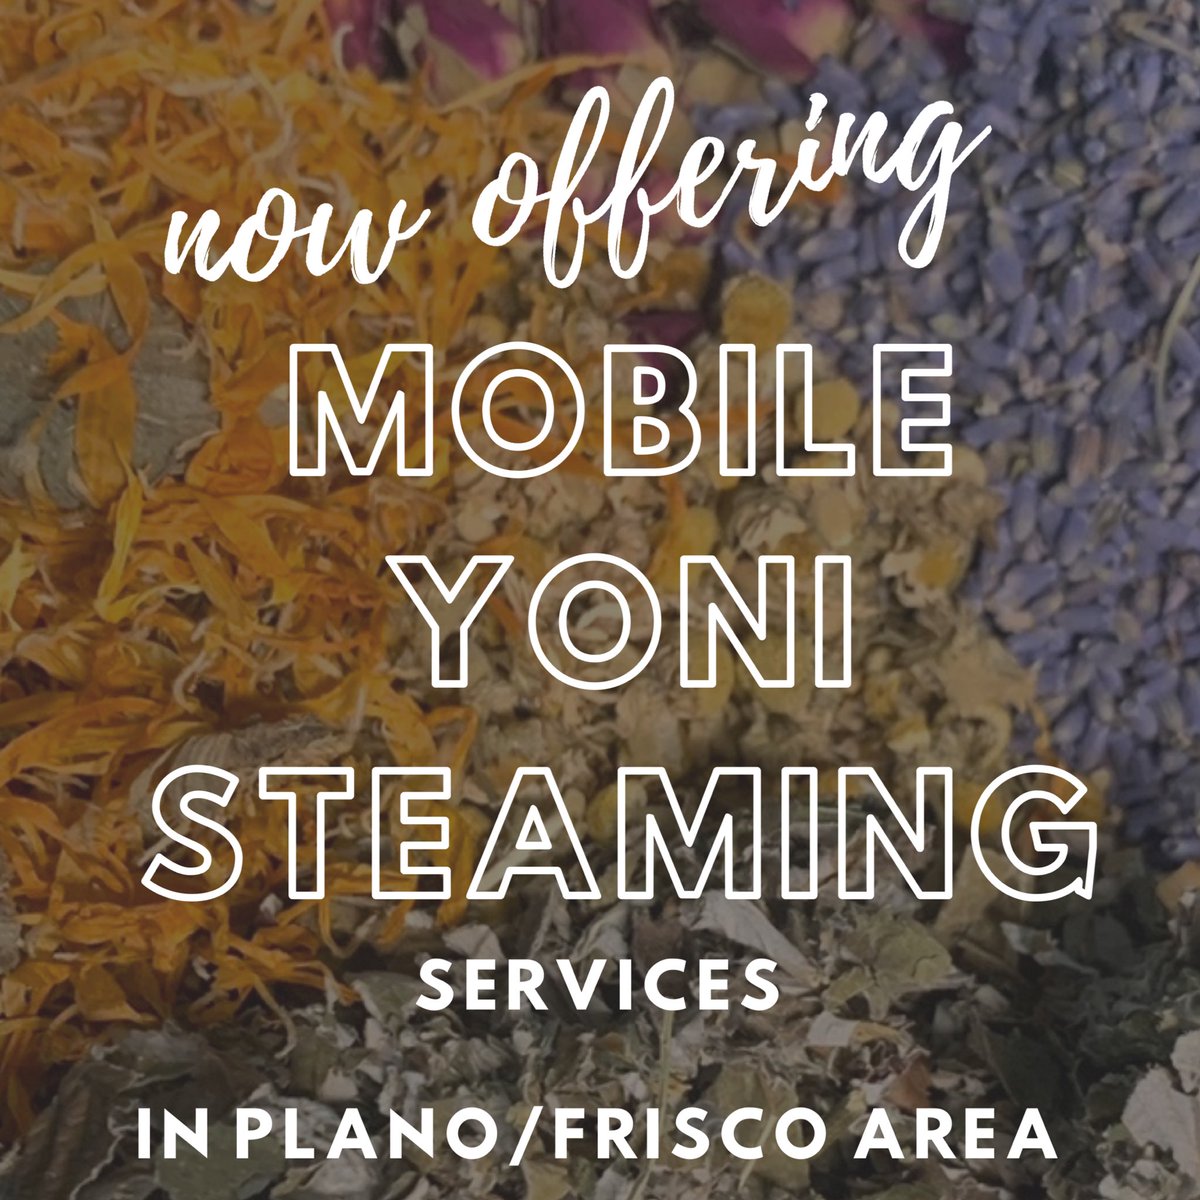 We’ve expanded our business to offering Services!
Appointments starting December 6th in Frisco/Plano, TX area. Please DM for surrounding areas (may incur mileage upcharge). 

Bodyloveyonisteamspa.com #yonisteaming #vagacials #yonisteam #selfcare #selfcaresunday #blackownedbusiness